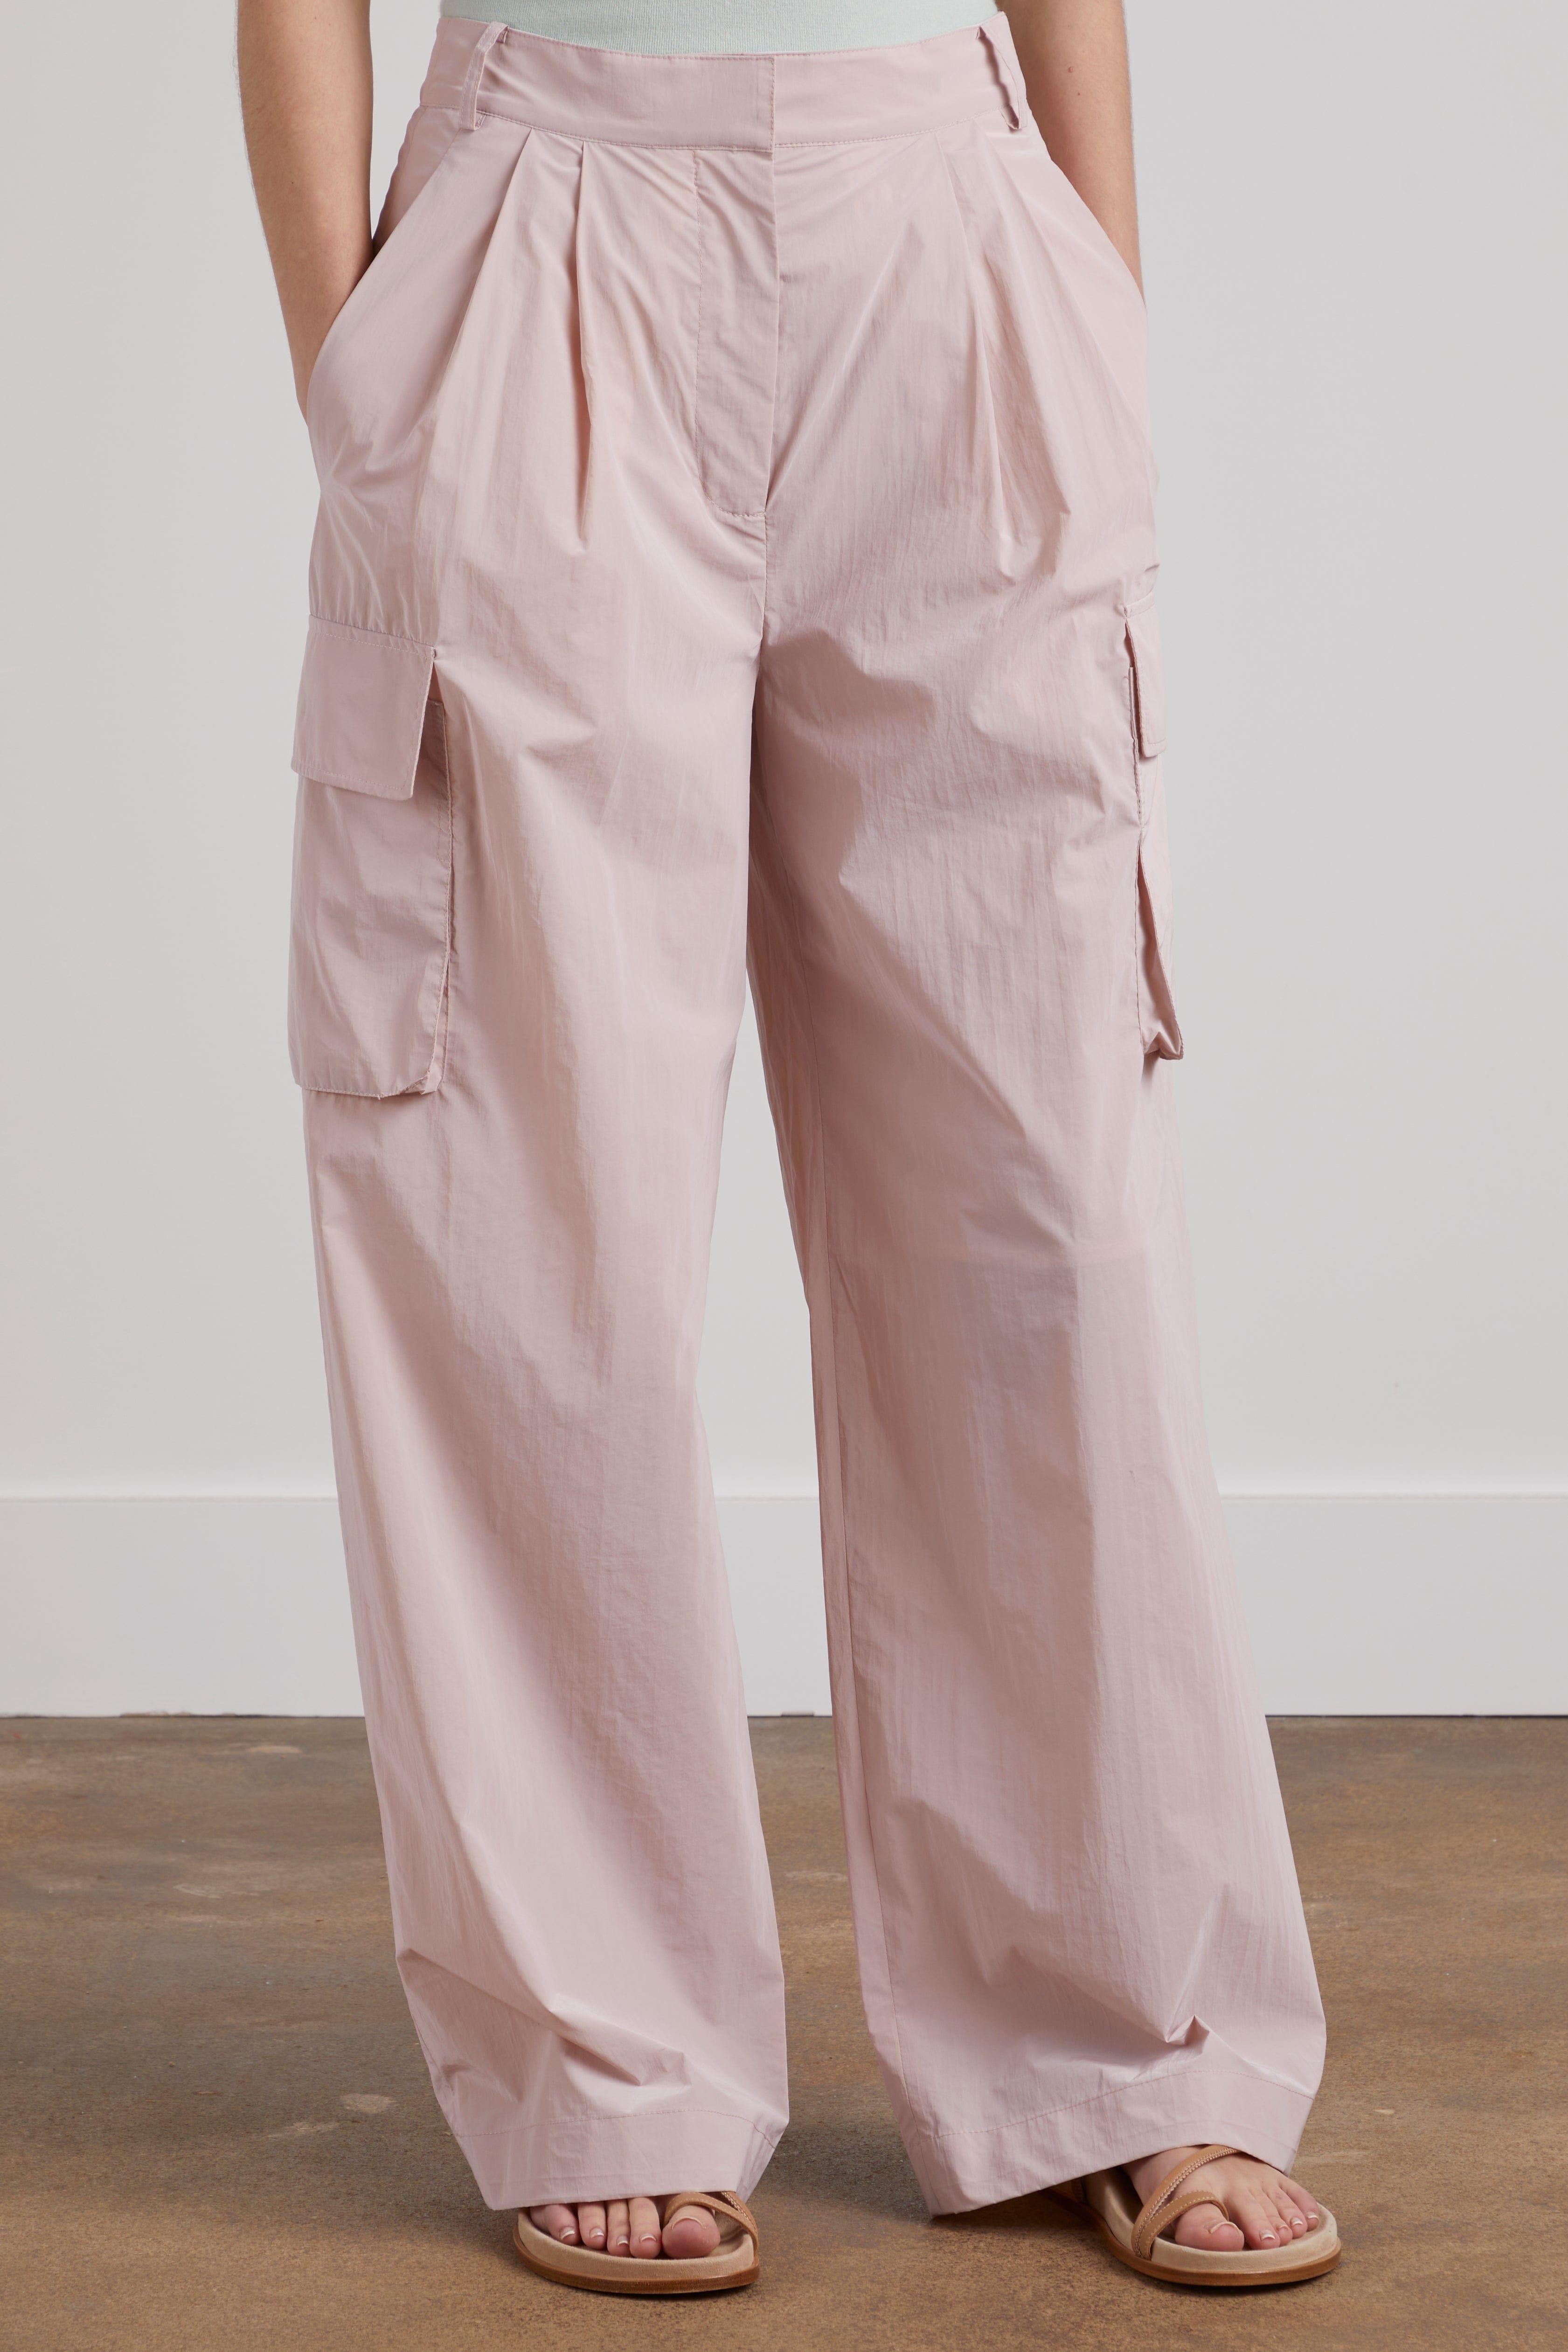 THE FRANKIE SHOP Maesa Pleated Woven Wide-leg Cargo Pants, 44% OFF